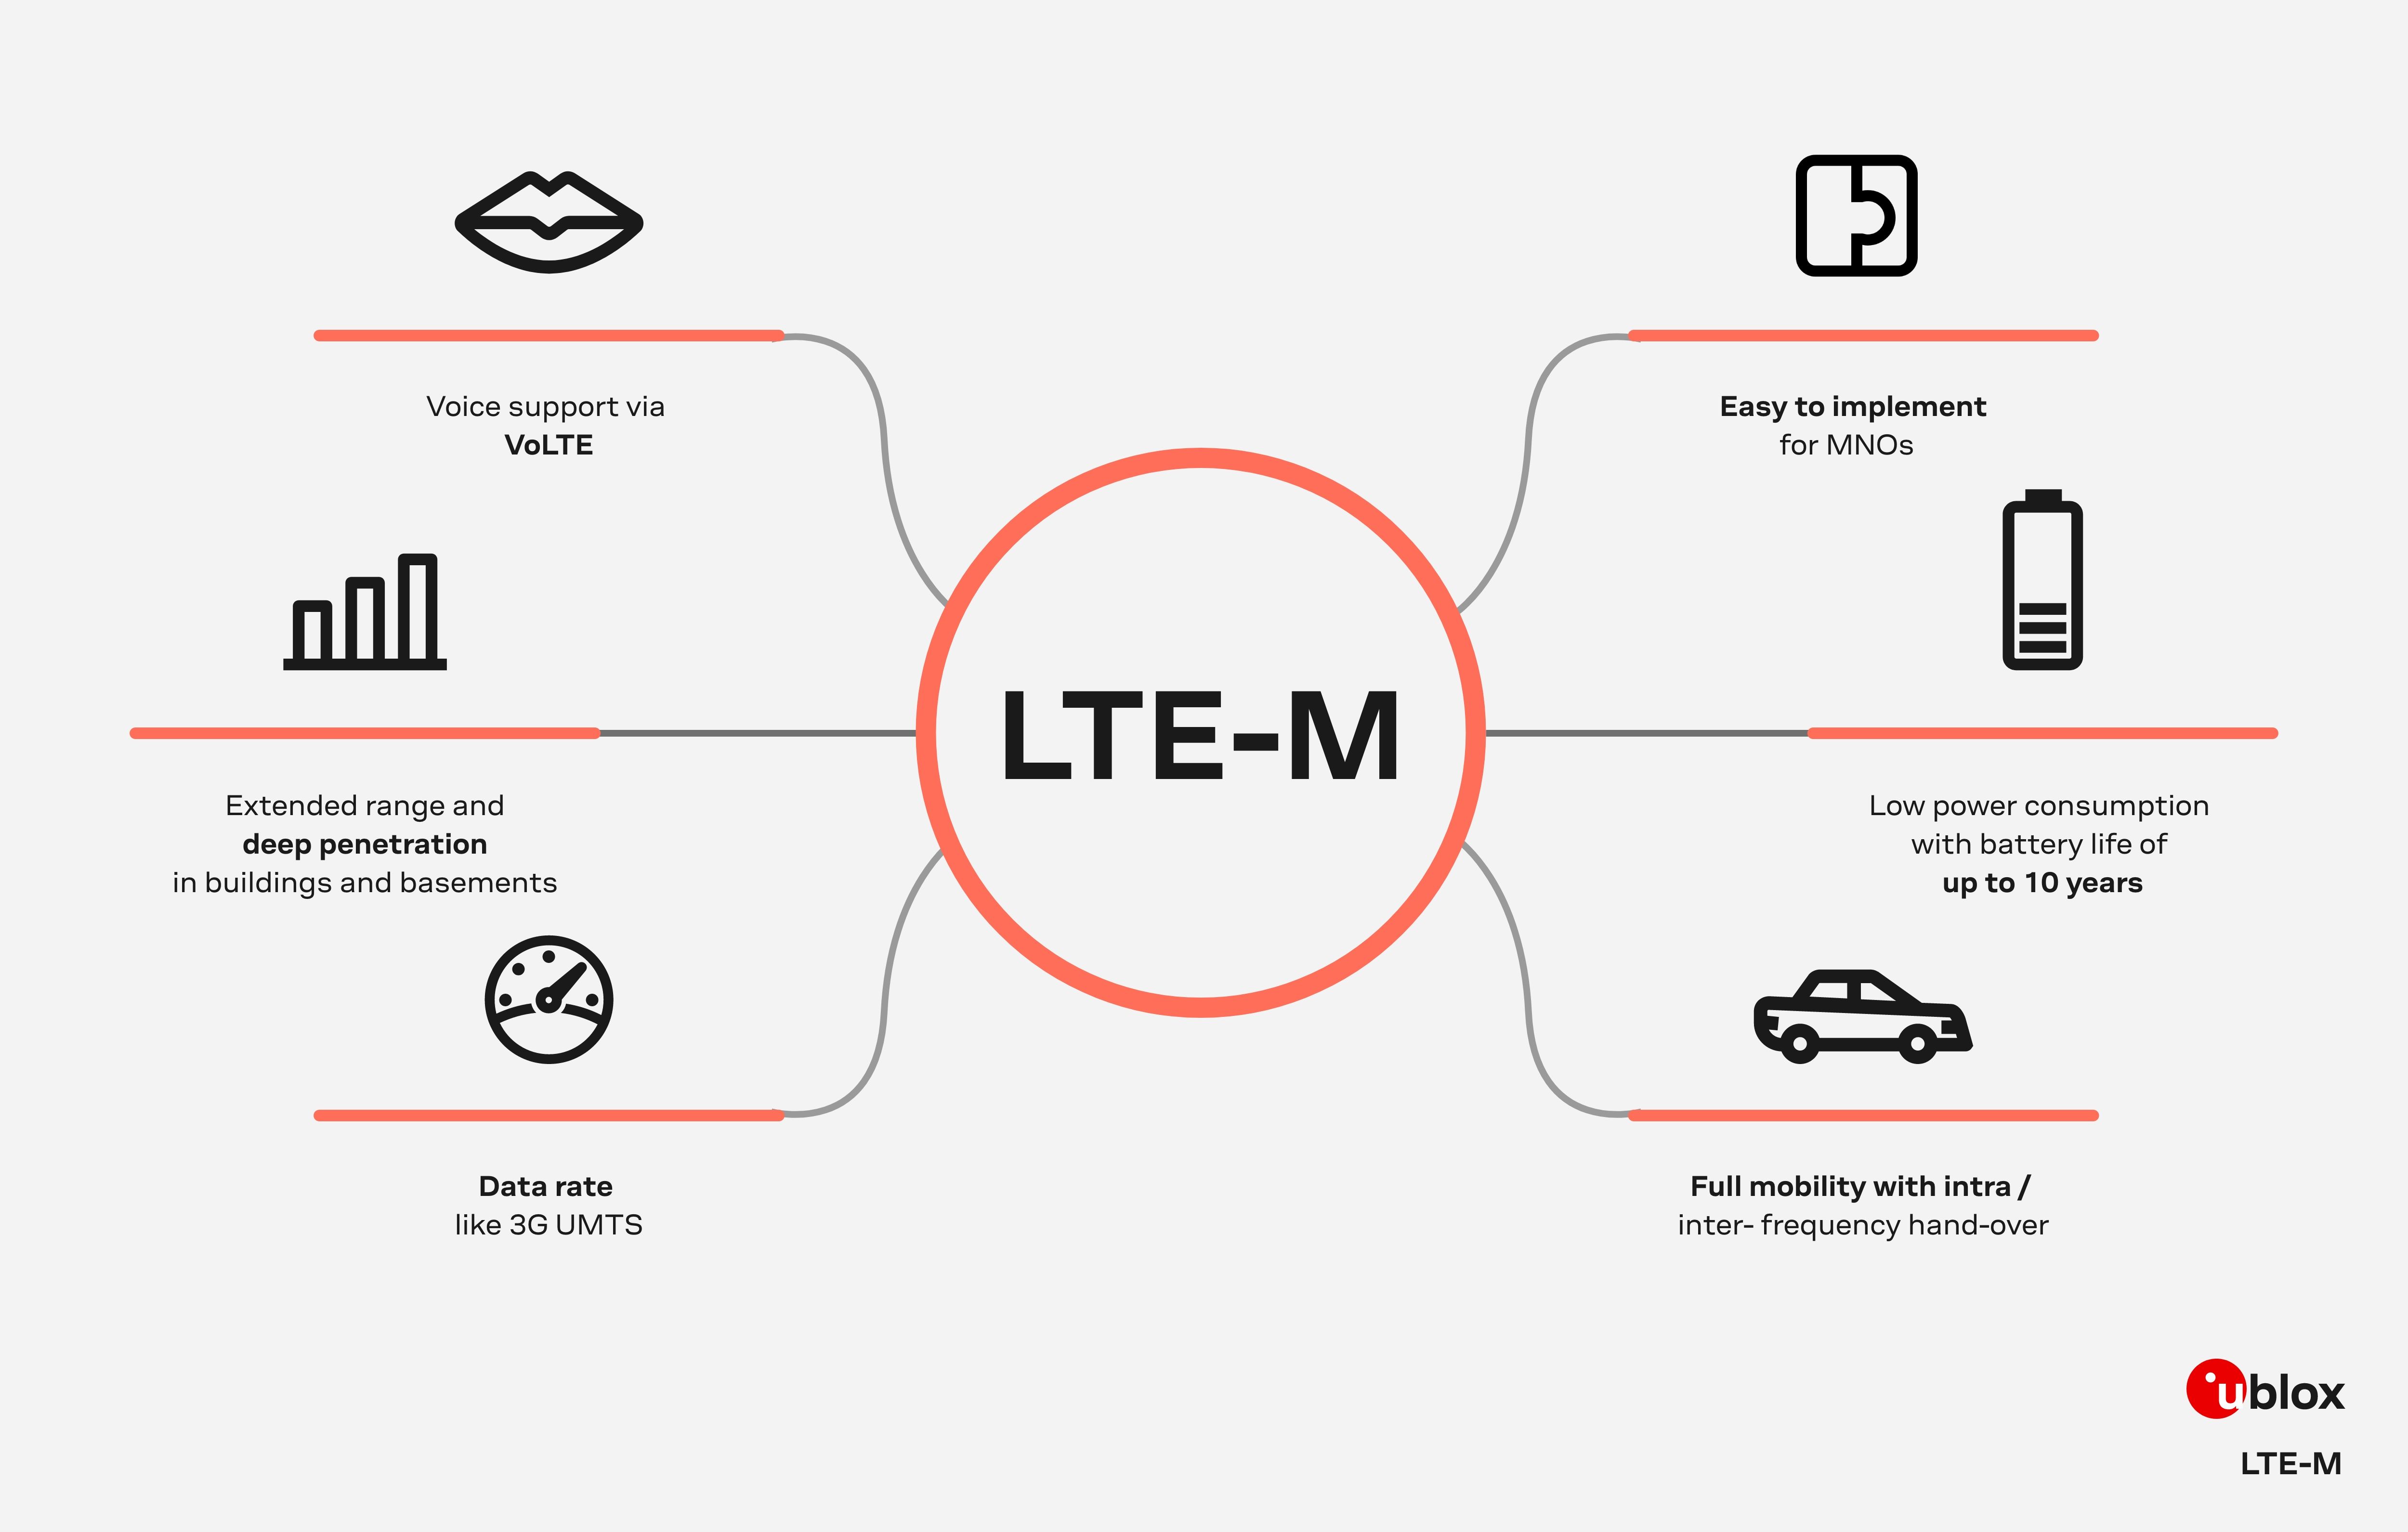 lte-m: diagram presenting key features of this technology